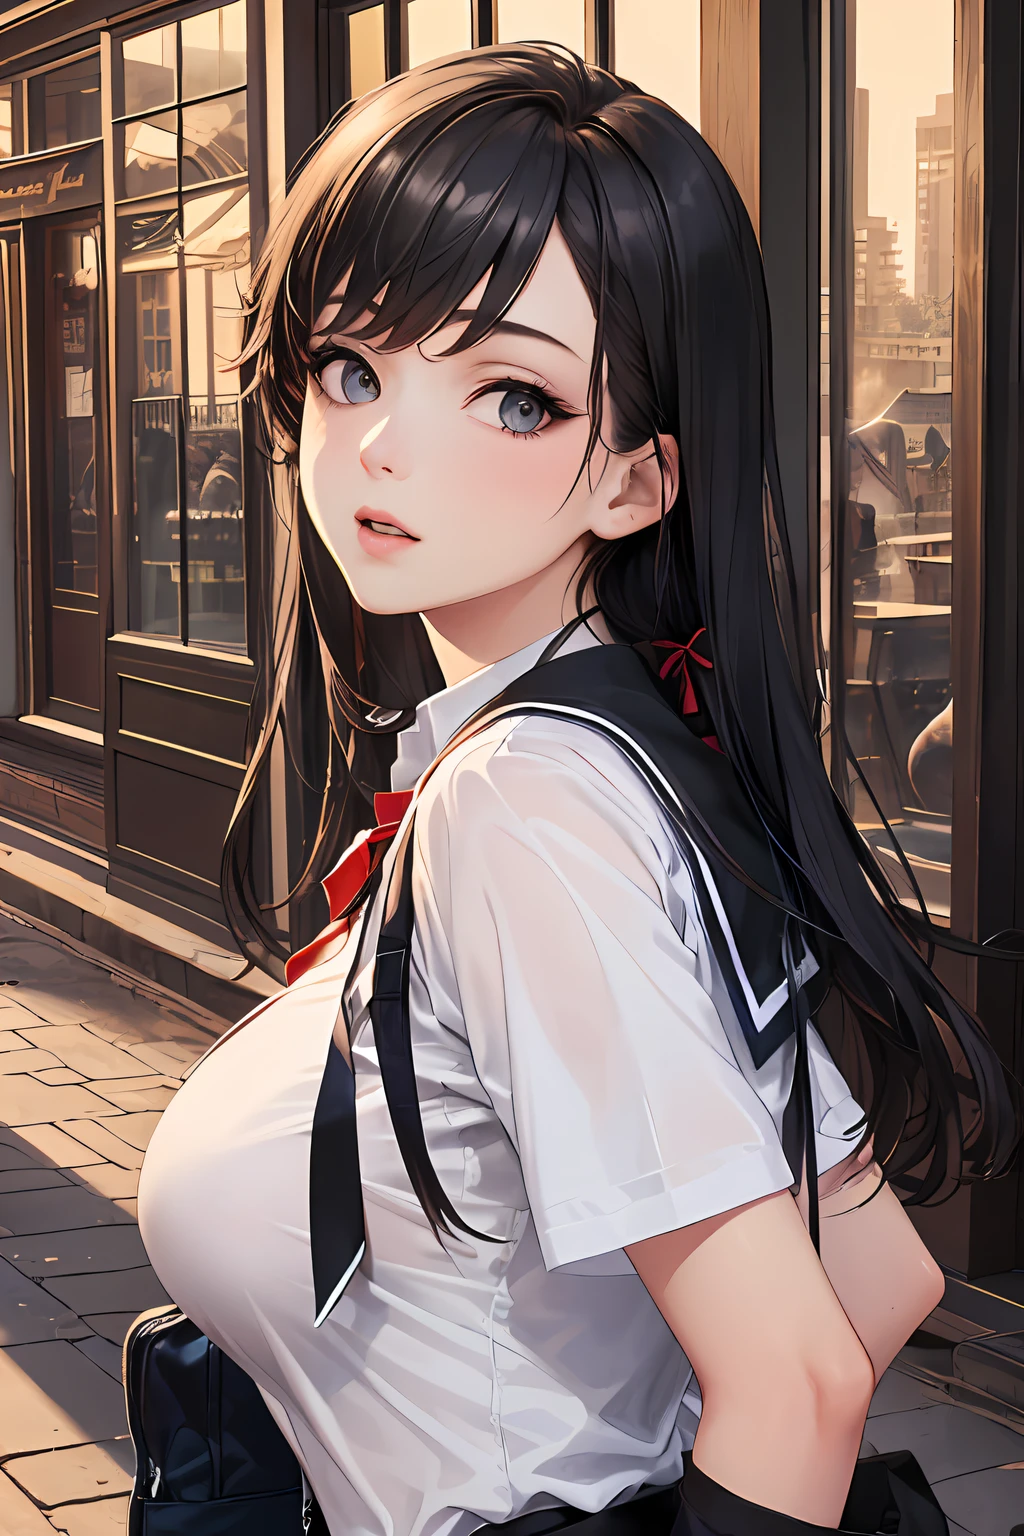 (((Masterpiece, Top Quality, Best Quality, Official Art, Beautiful and Aesthetic: 1.3))), (1 Girl: 1.5), Buttocks, Very Detailed, Sexy, Best Detailed, ((((School Uniform)))), Black Hair, (Shiny Skin), (Many Colors: 1.1), (Big)))), Big Breasts, Thin areola